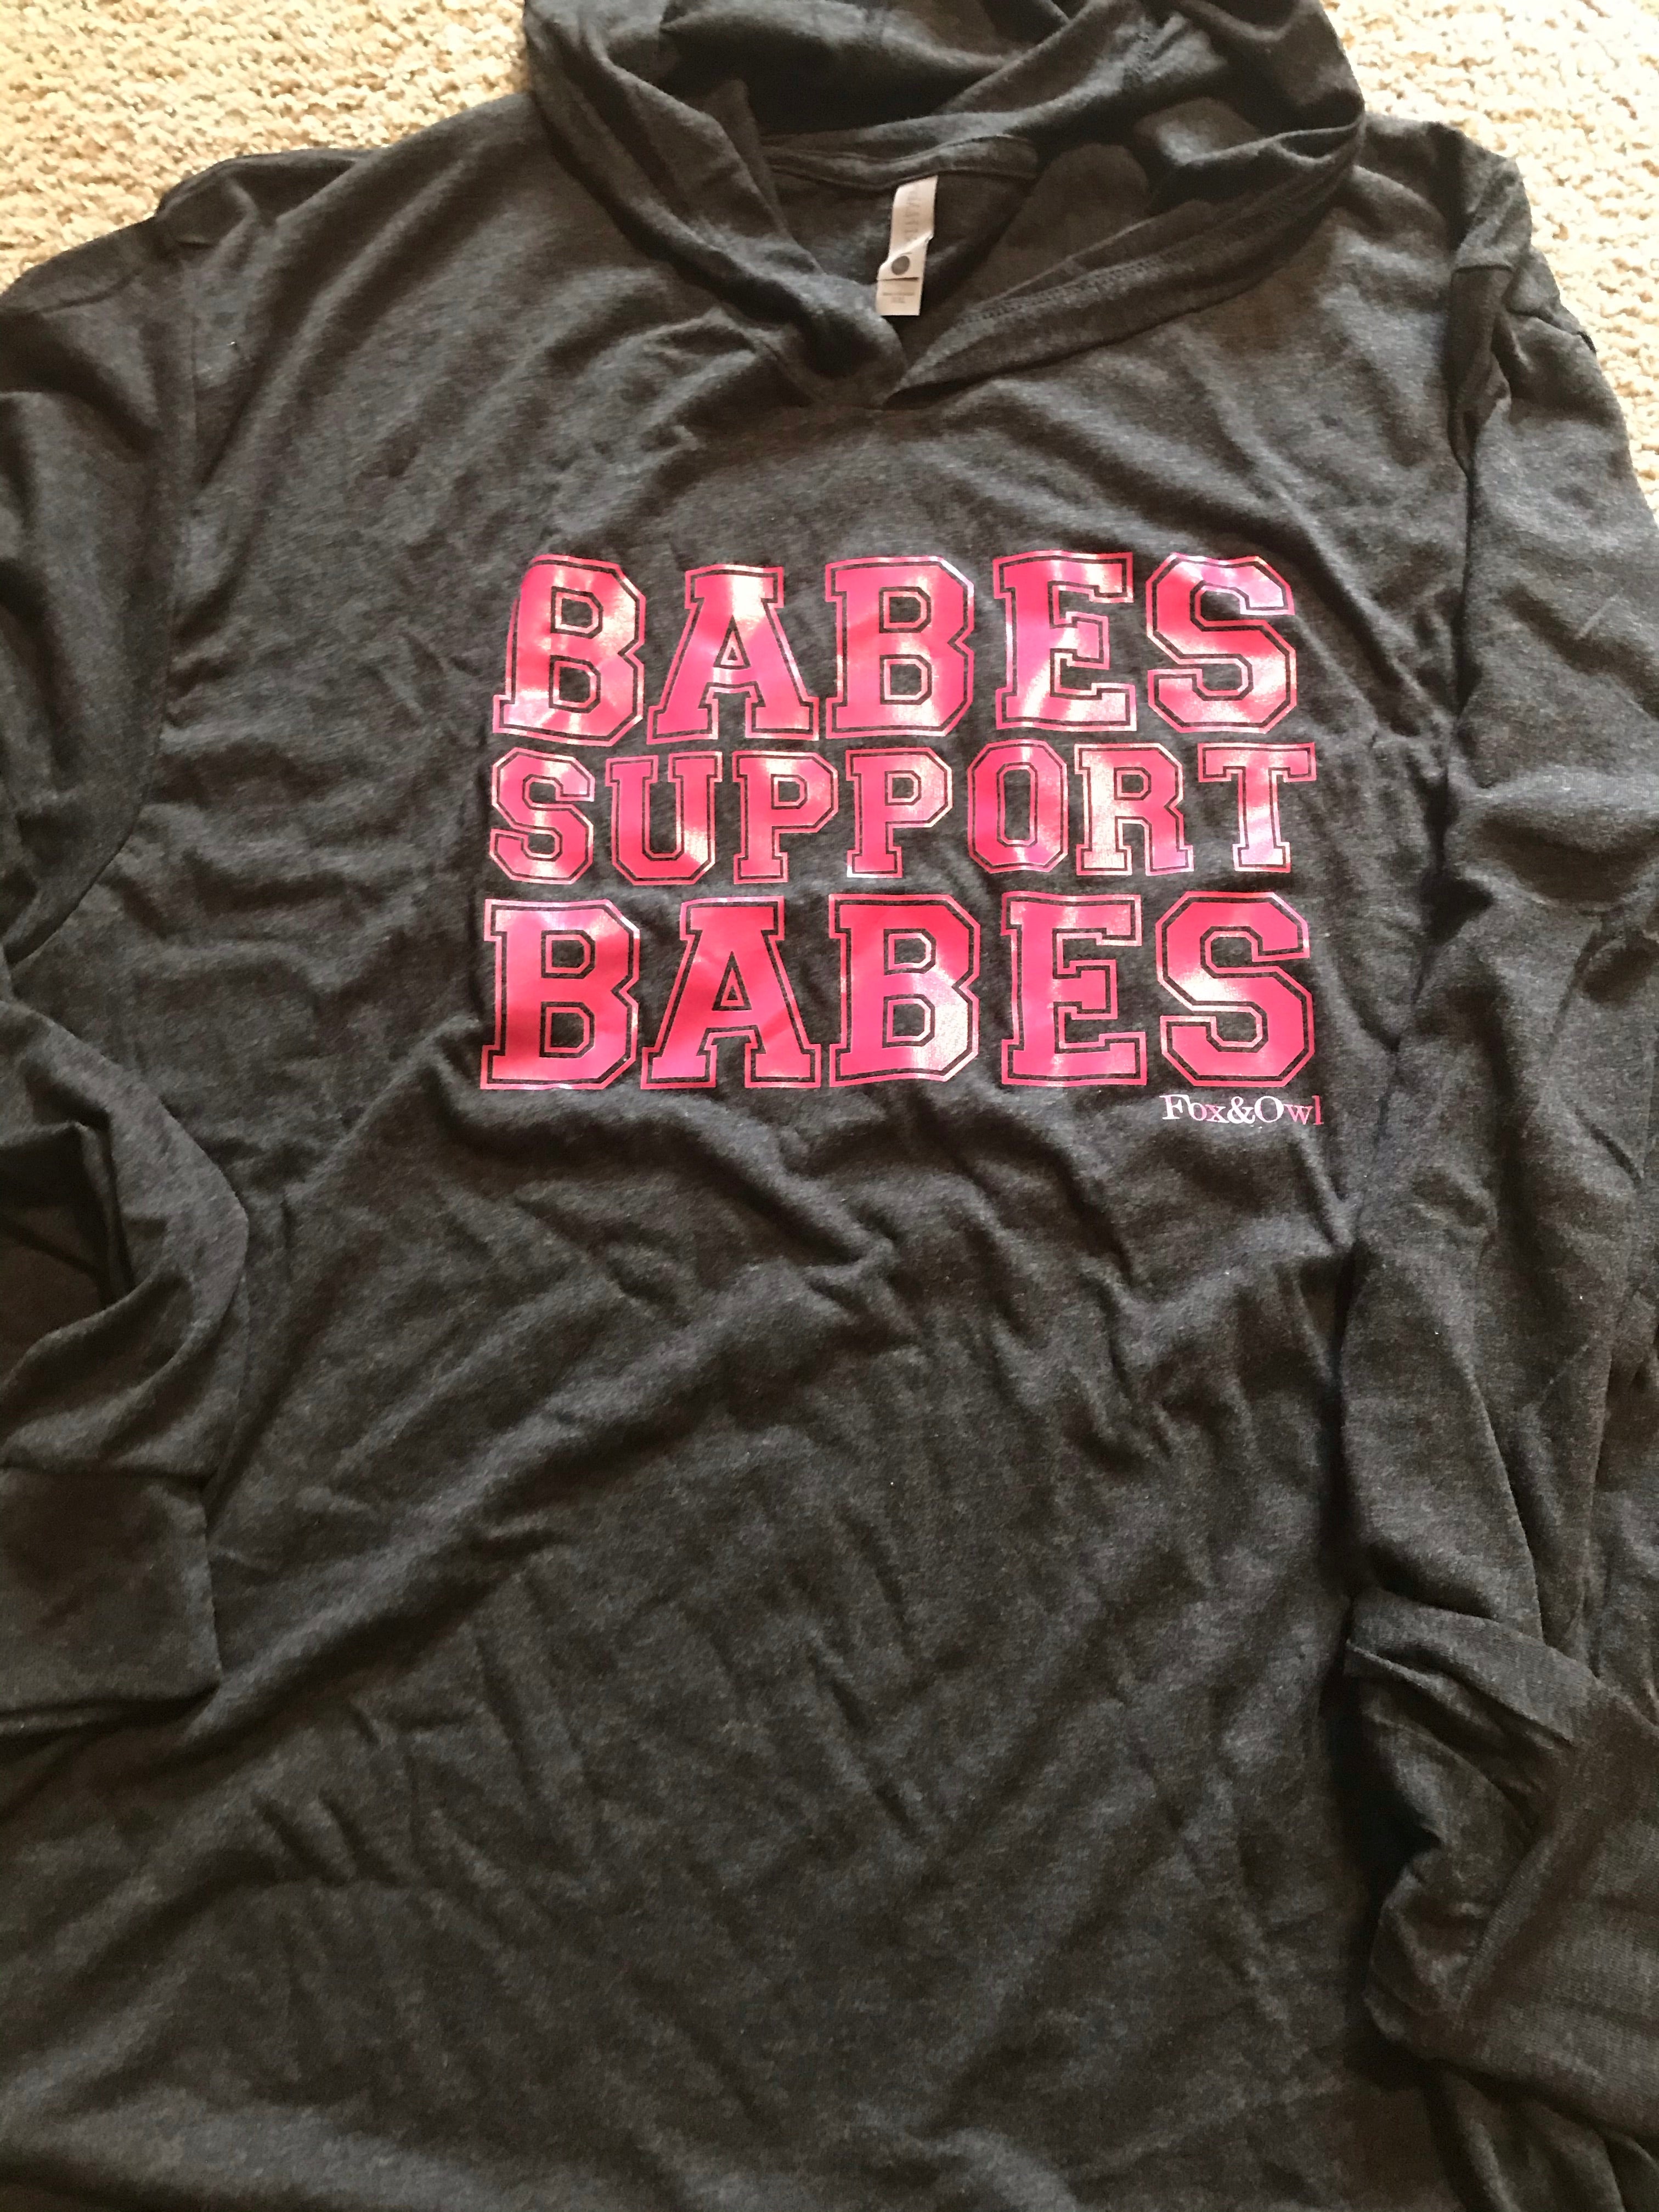 Babes support babes long sleeve hooded